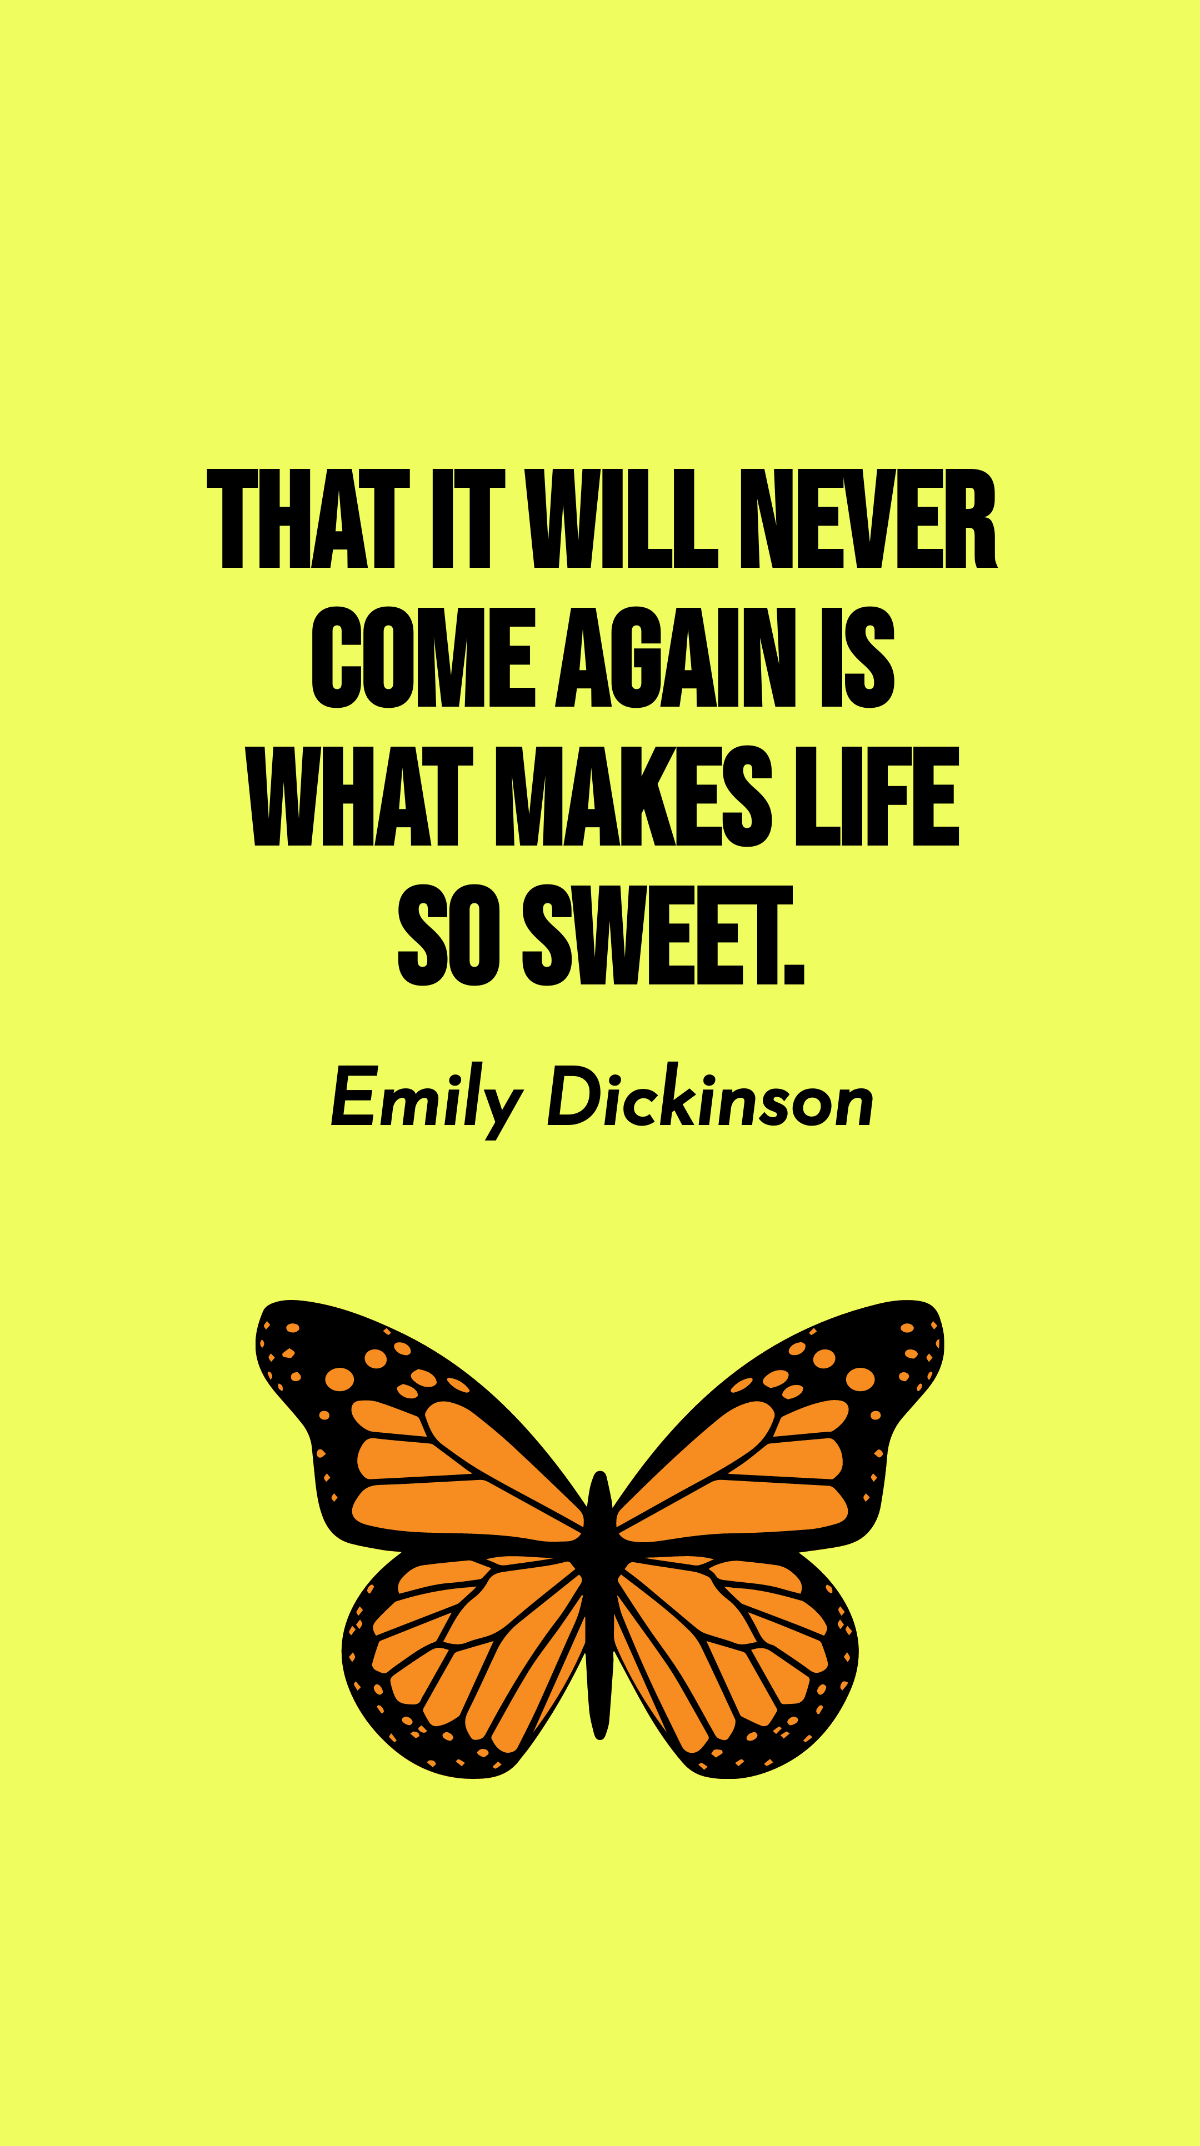 Emily Dickinson - That it will never come again is what makes life so sweet.